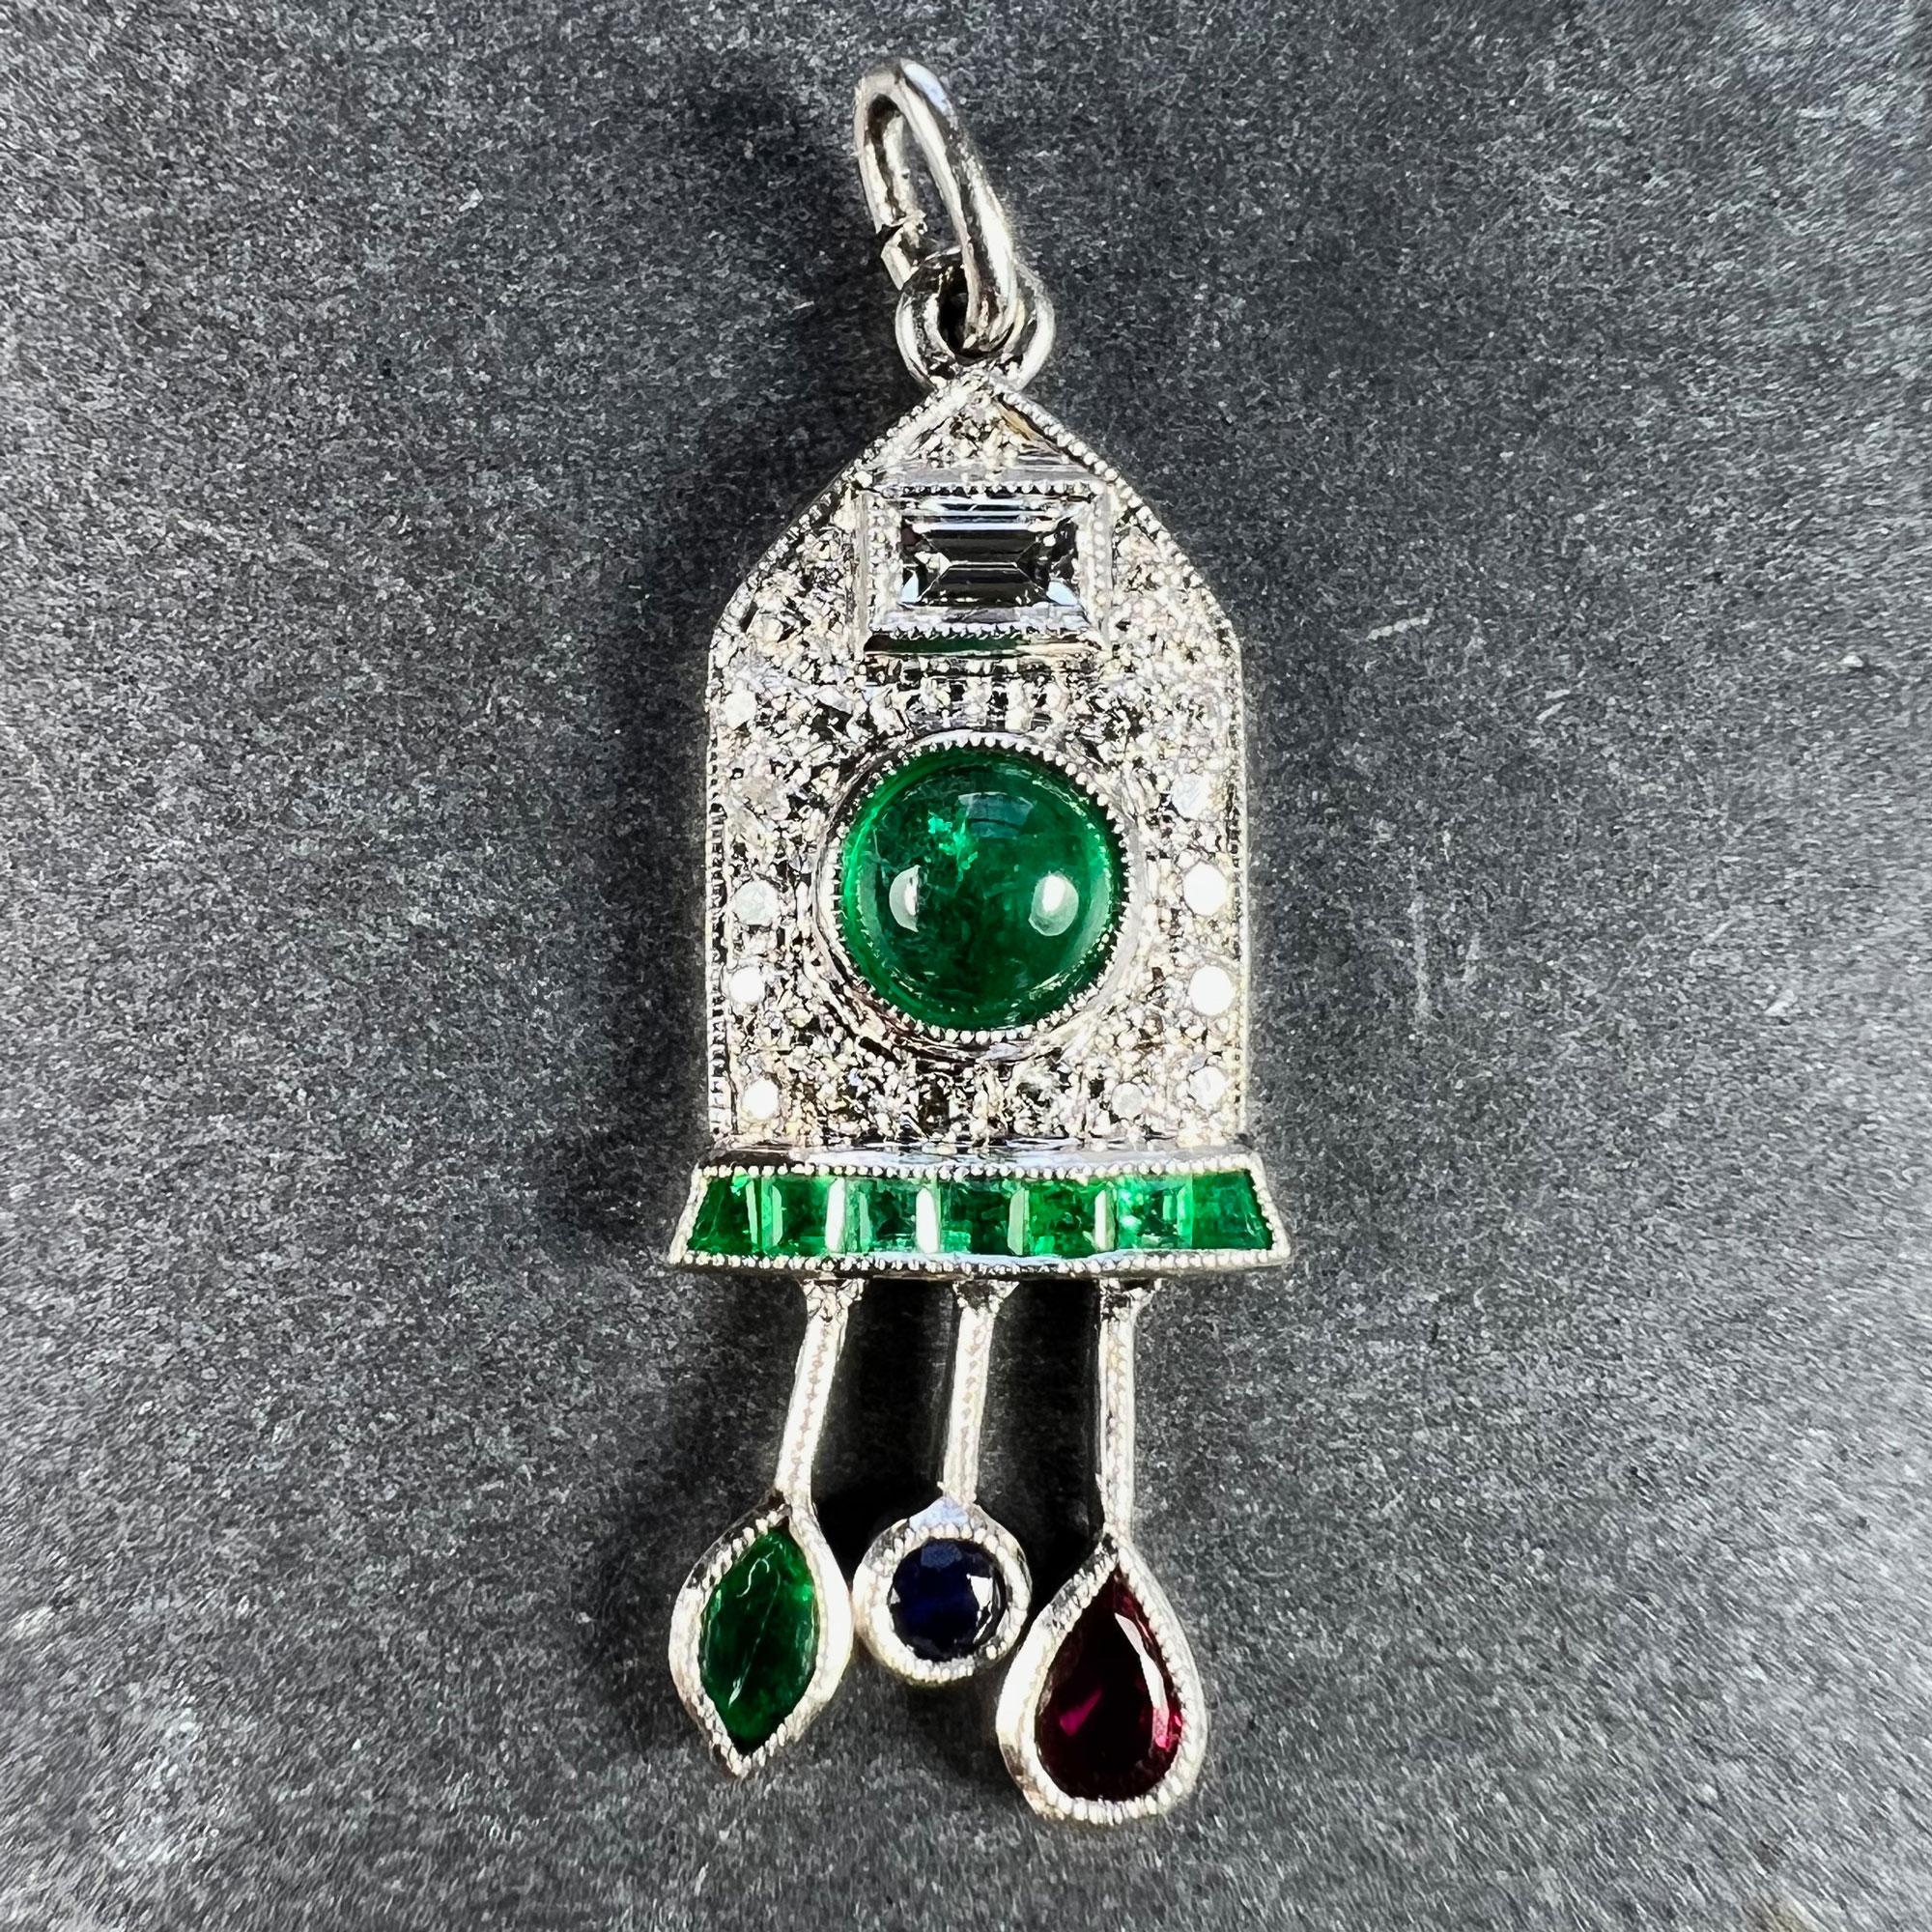 An Art Deco platinum charm pendant designed as a diamond and emerald cuckoo clock with sapphire, ruby and emerald weights and pendulum. Set with one emerald cut diamond and 21 round brilliant cut diamonds; one cabochon, 7 step cut and one marquise